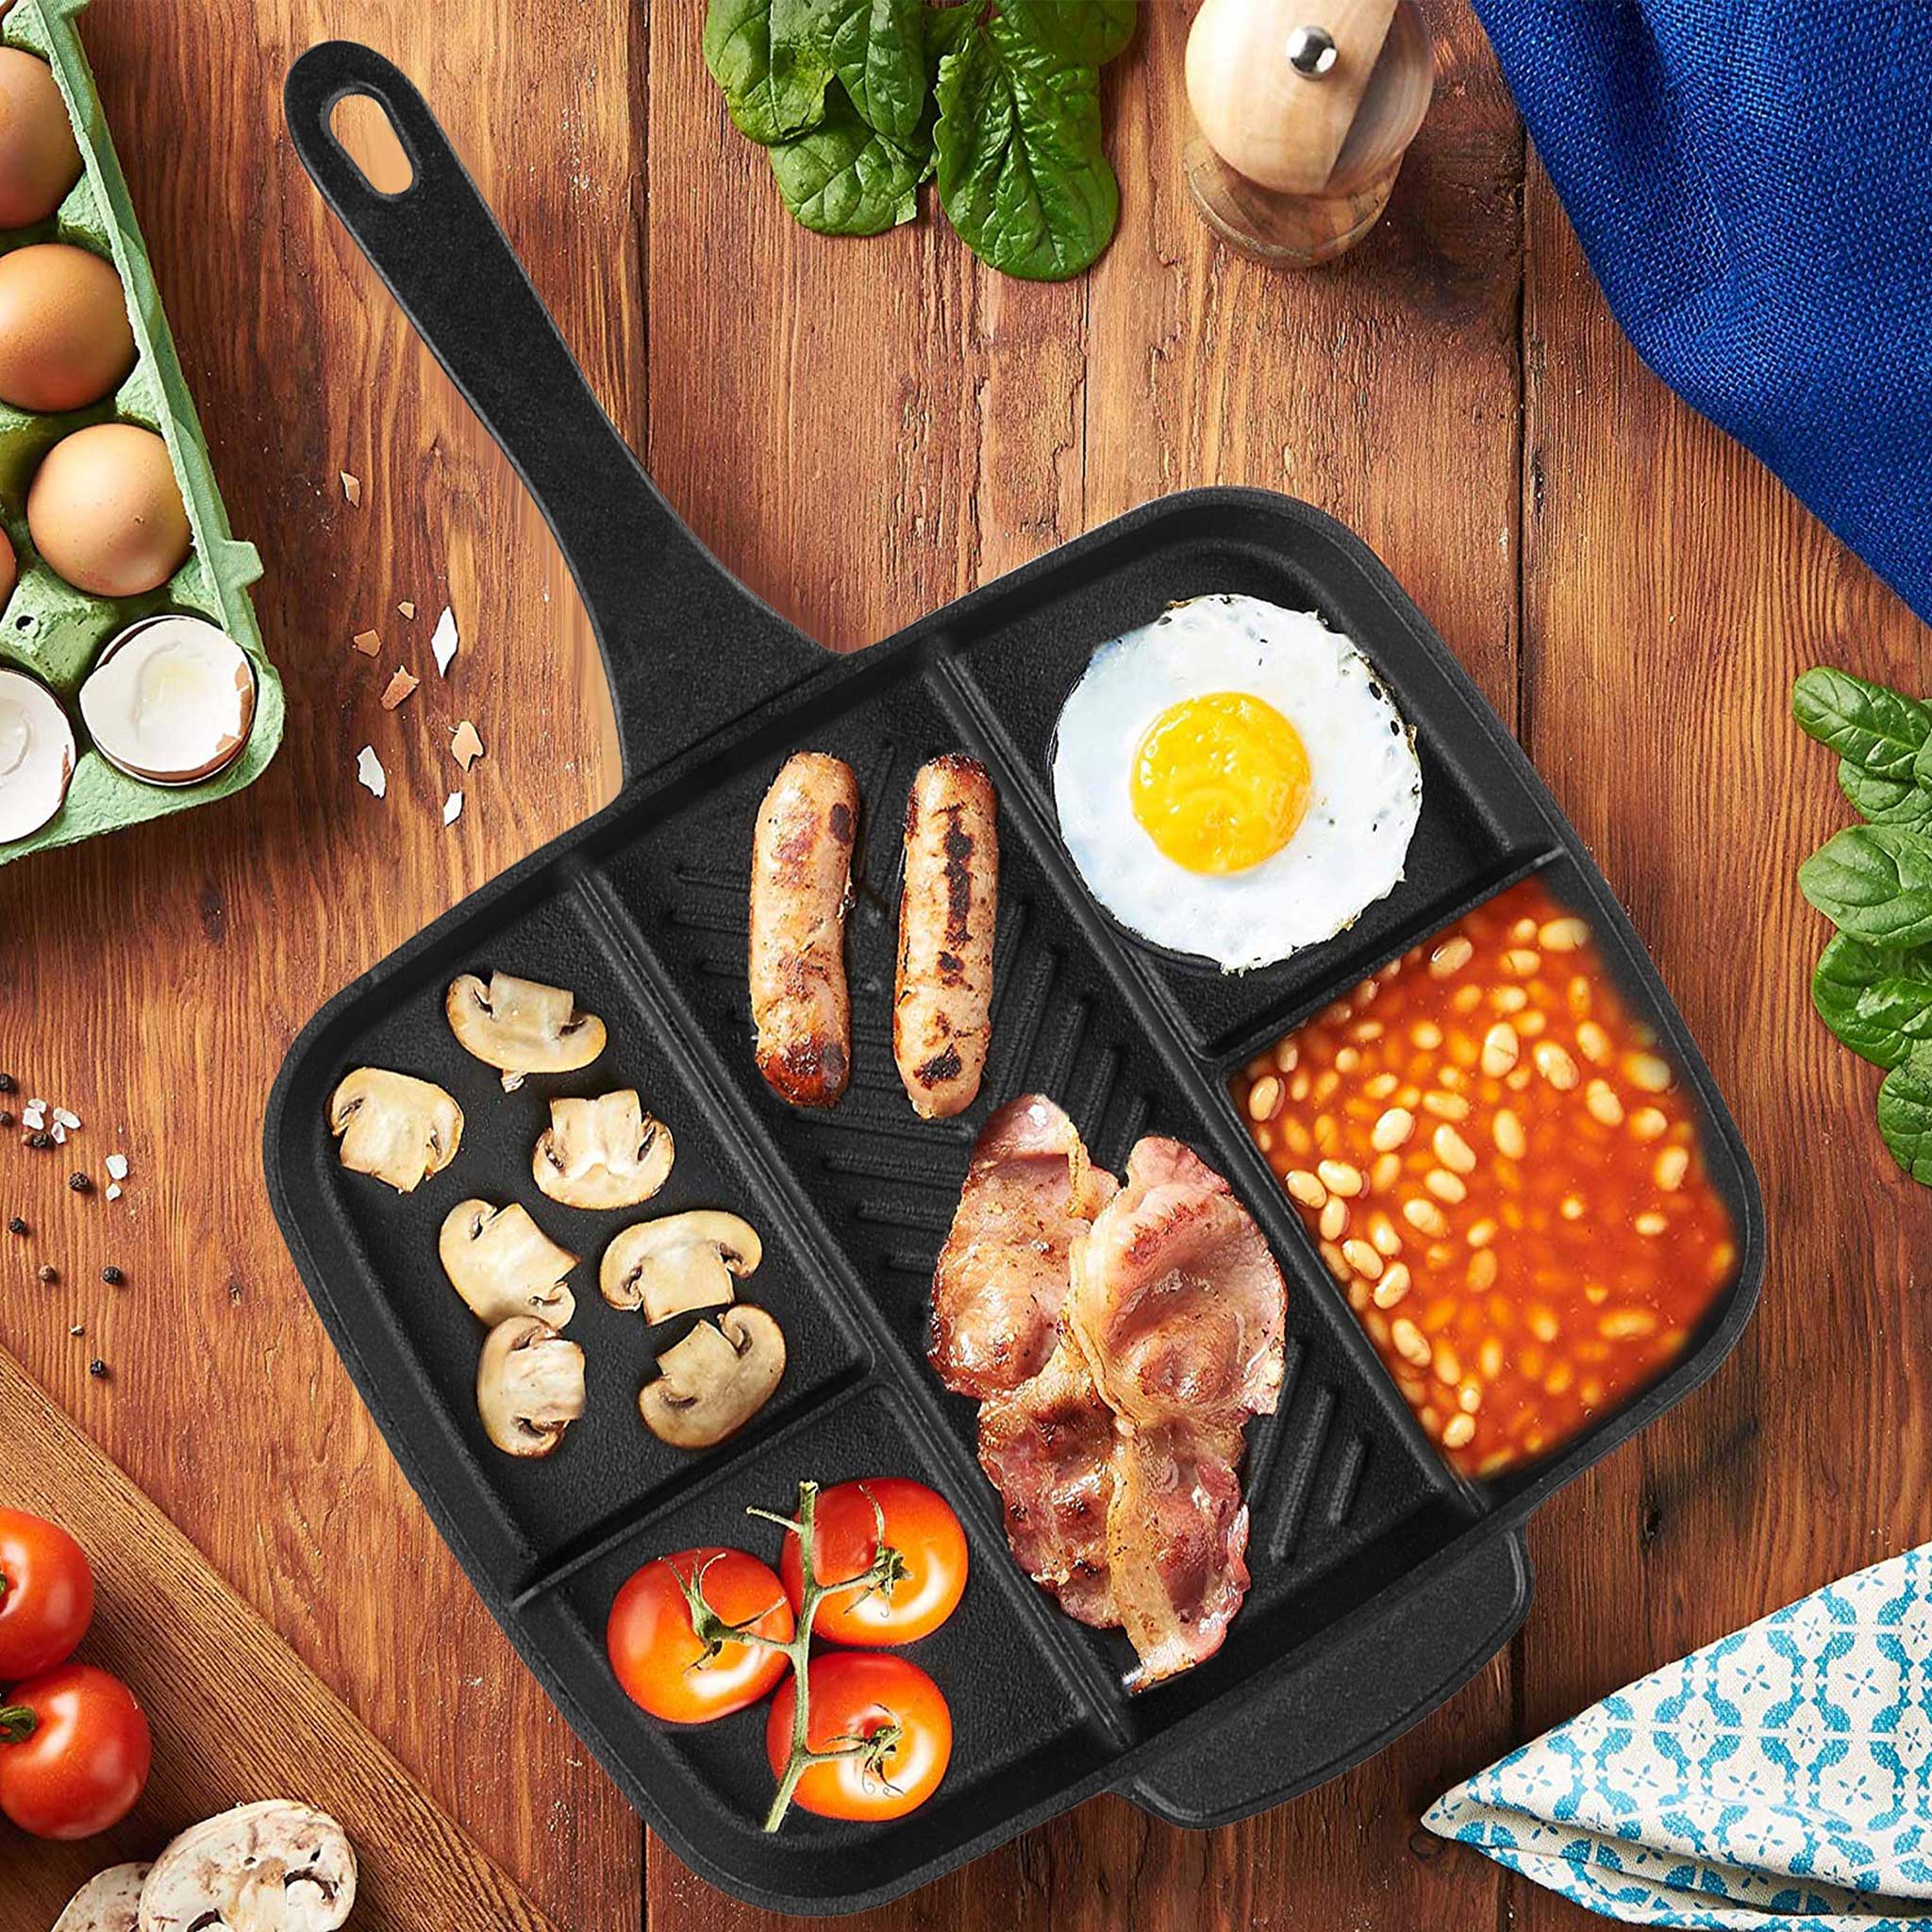 Breakfast cooked with the Ultimate Breakfast Pan from China Blue